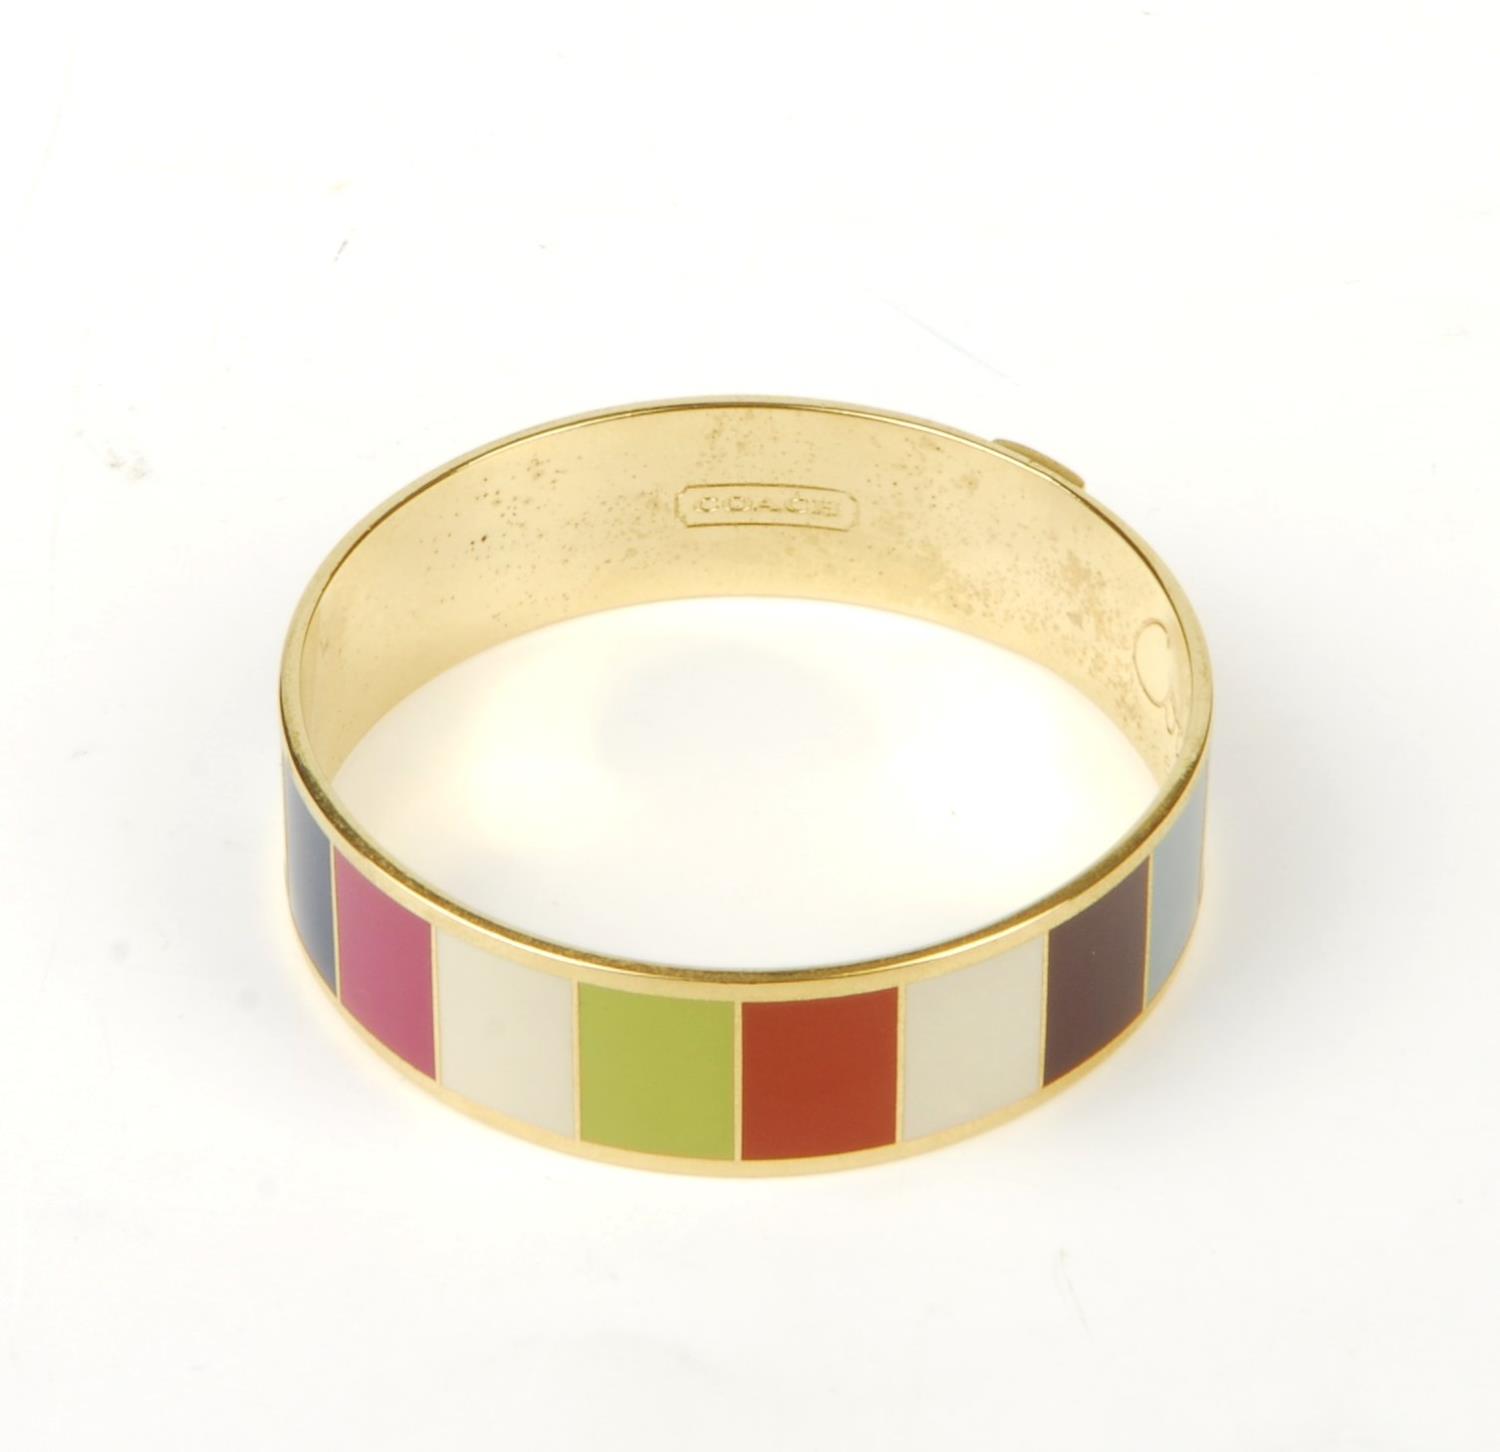 COACH - a Legacy striped bangle. The gold-tone bangle featuring multicoloured striped enamel inlay - Image 2 of 9